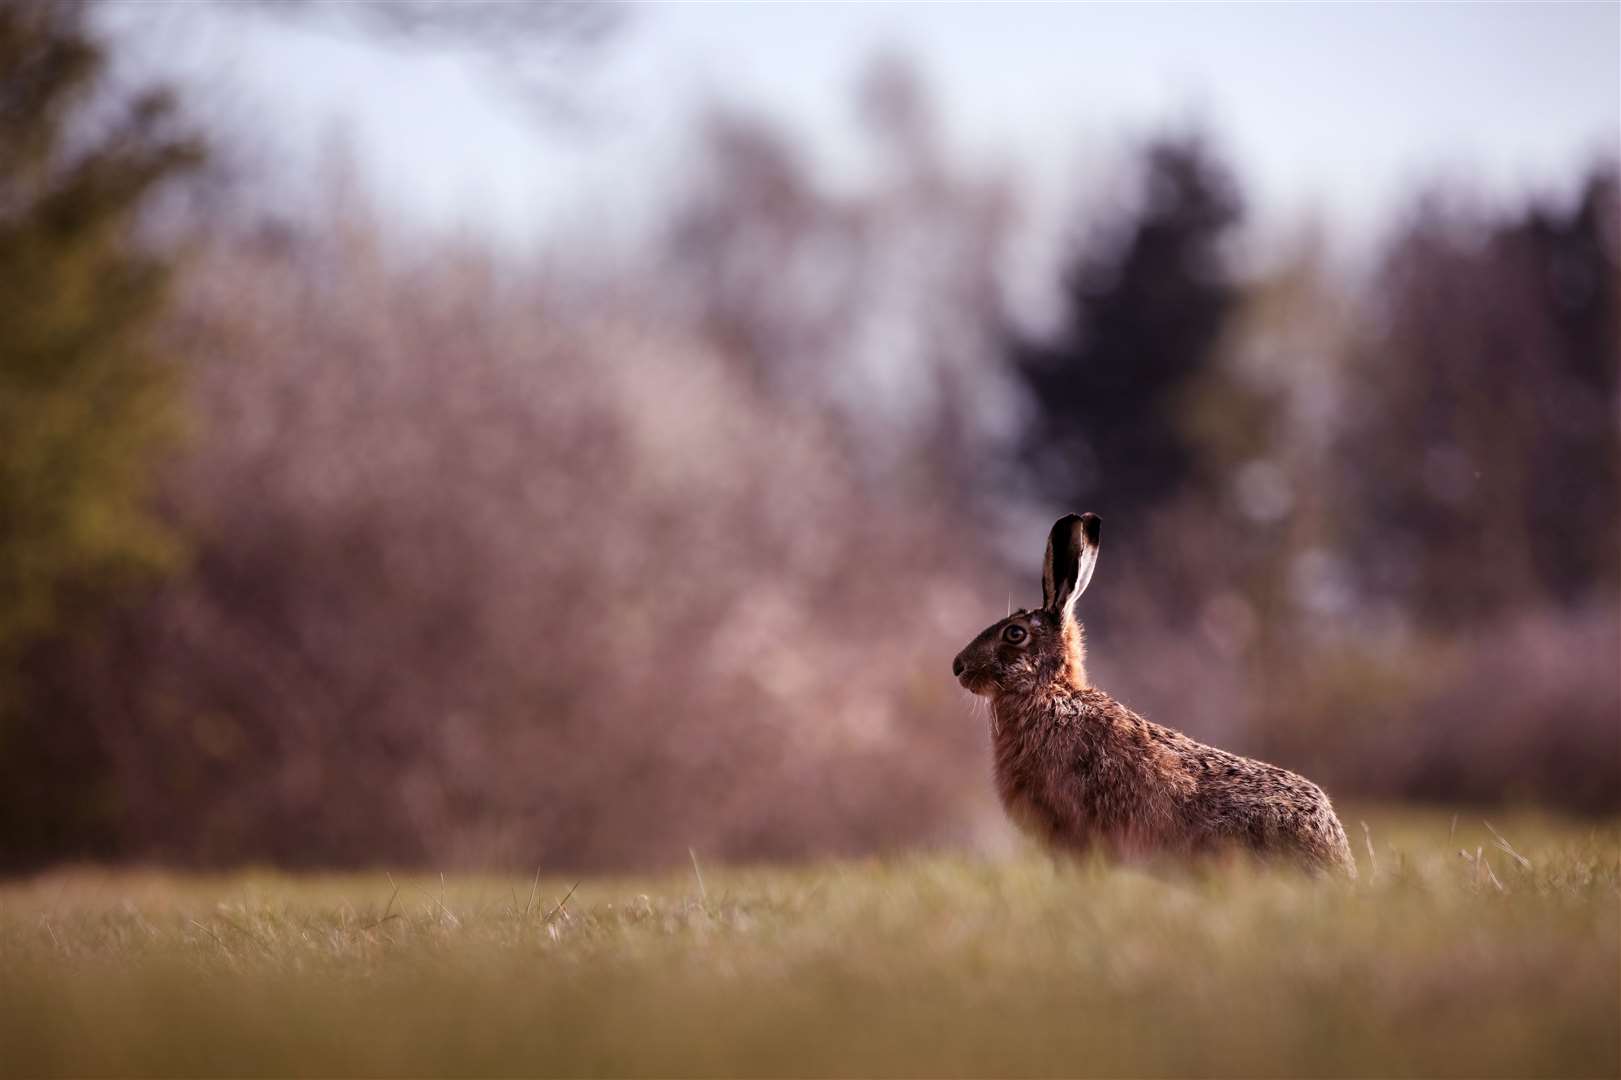 The March Hare, which is a symbol of Spring in pagan faiths, is the origin of the Easter bunny